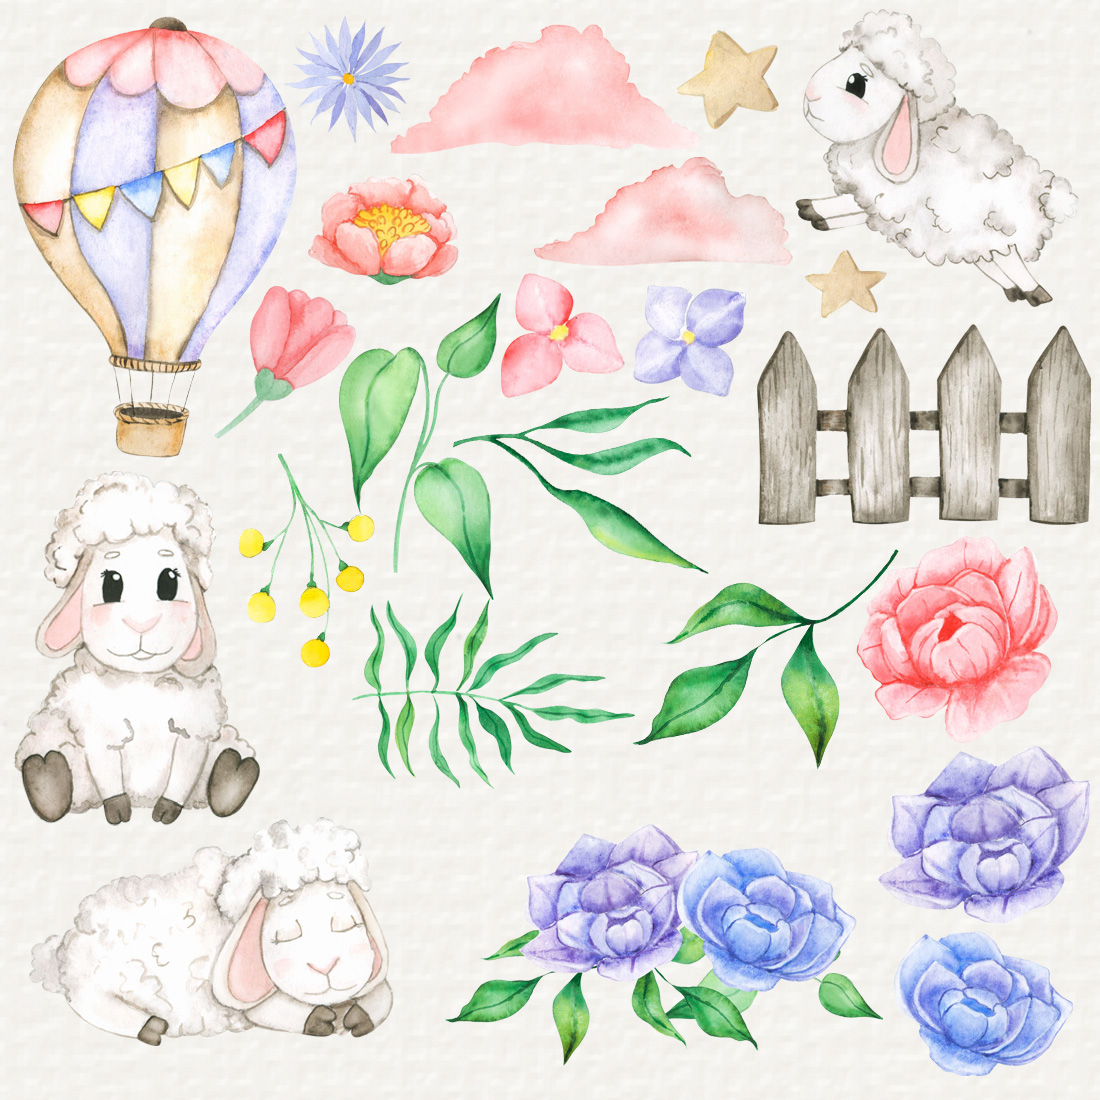 Sheep Watercolor Clipart covr image.